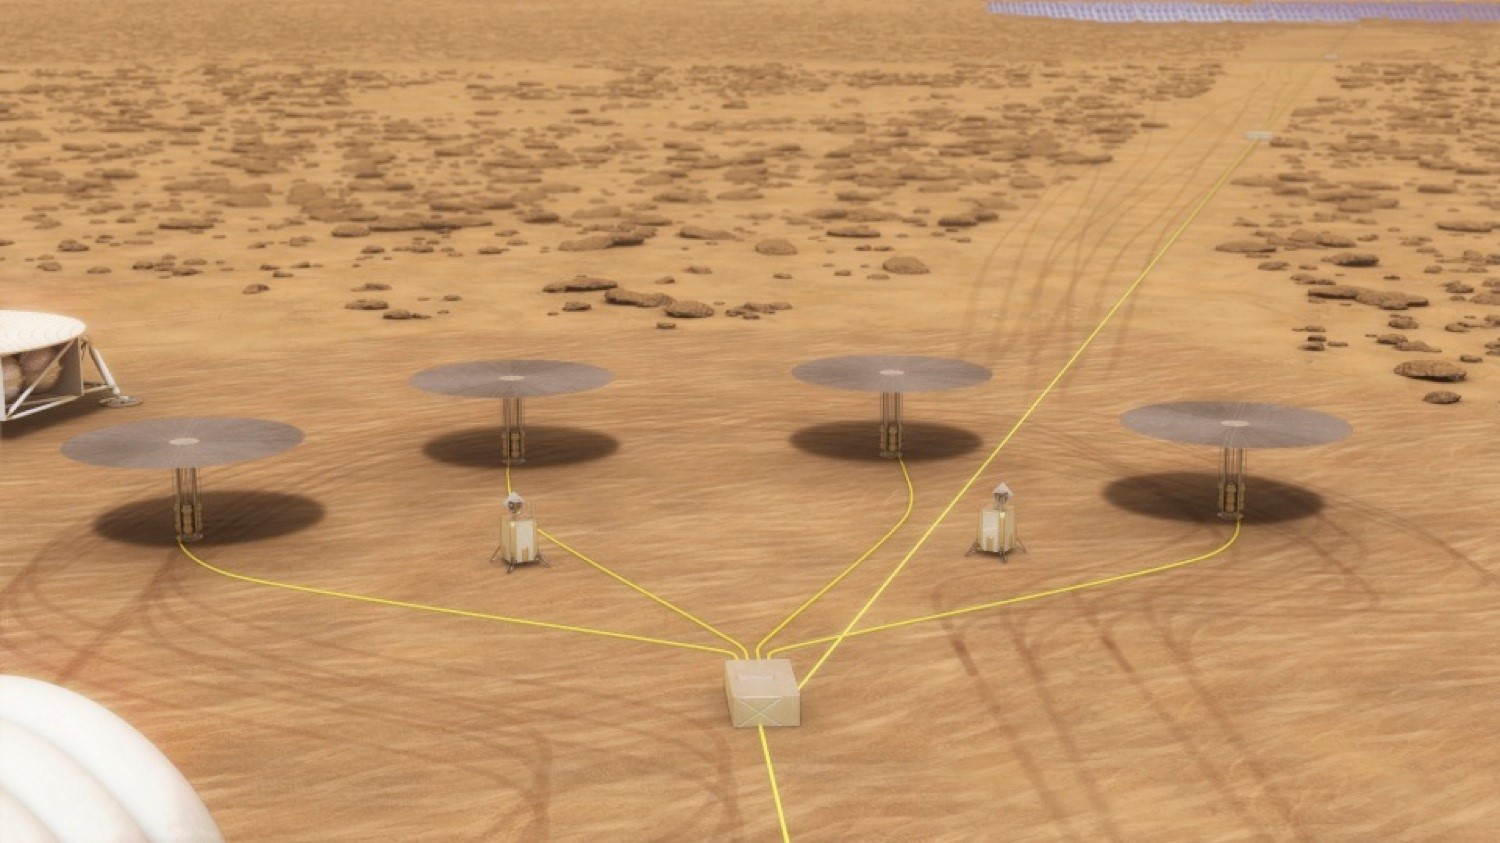 Artist's illustration of the umbrella-like heat radiators of four Kilopower nuclear reactors casting shadows on the Martian surface. (Image credit: NASA)